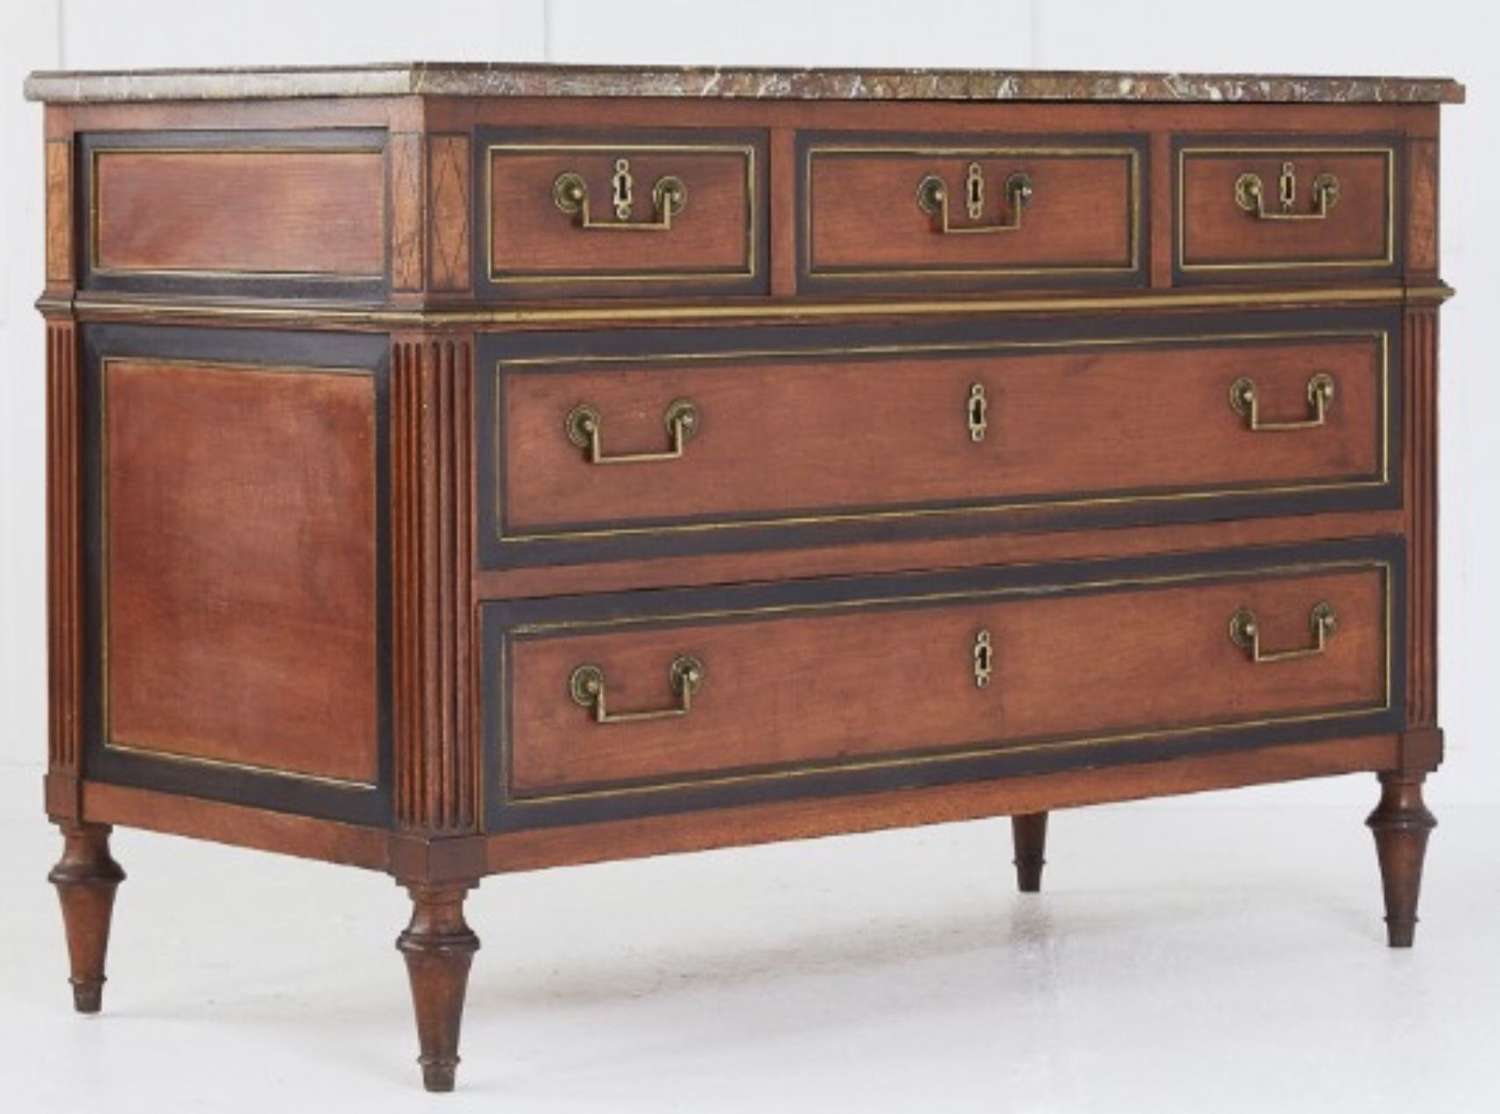 C18th French Louis XVI cherrywood commode